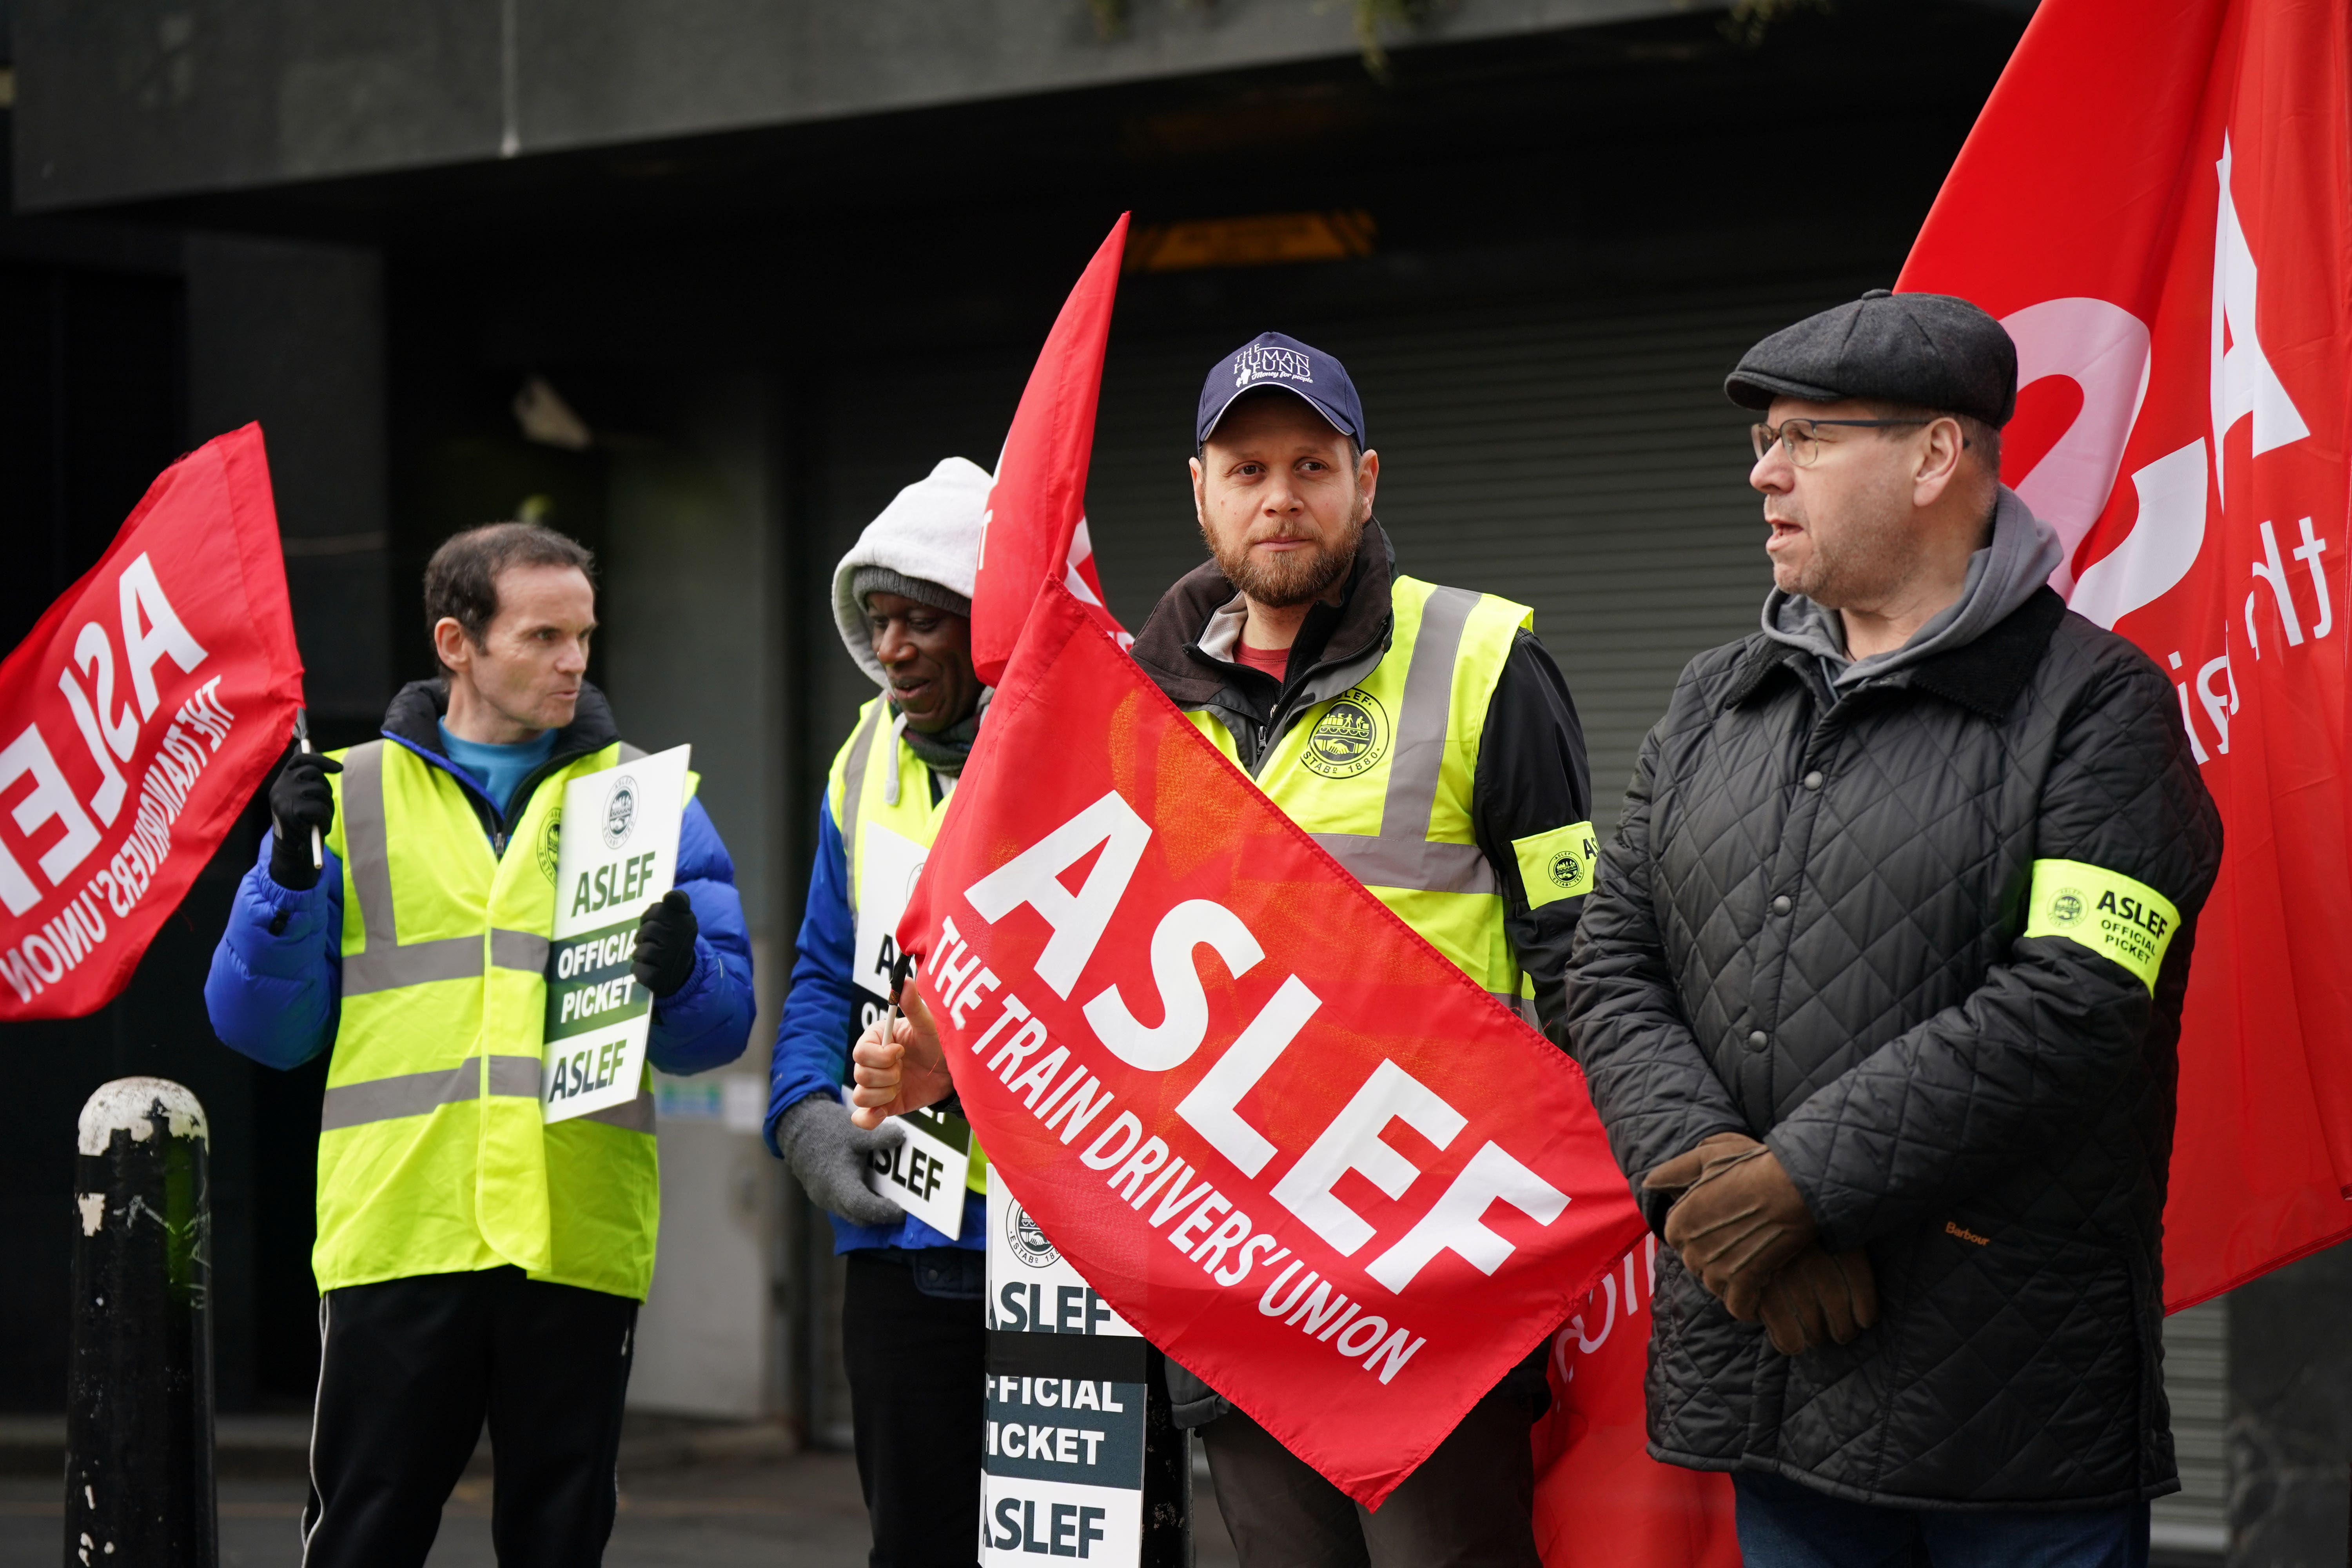 Strikes by train drivers could continue for three more years, a trade union boss has warned (Yui Mok/PA)